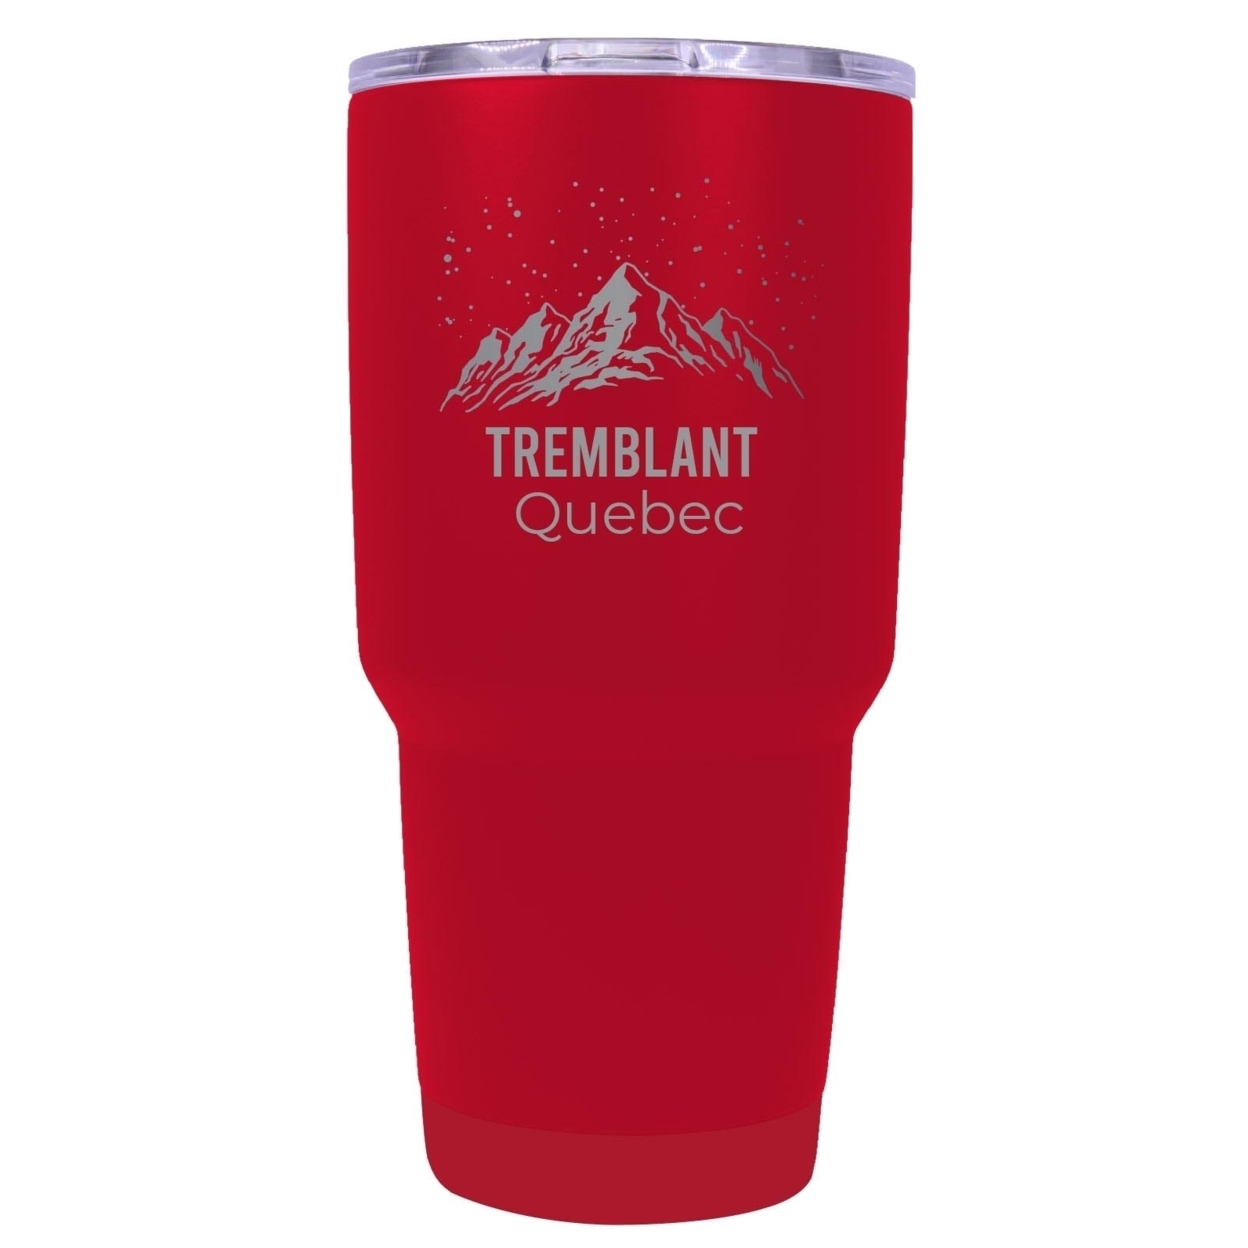 Tremblant Quebec Ski Snowboard Winter Souvenir Laser Engraved 24 Oz Insulated Stainless Steel Tumbler - Red